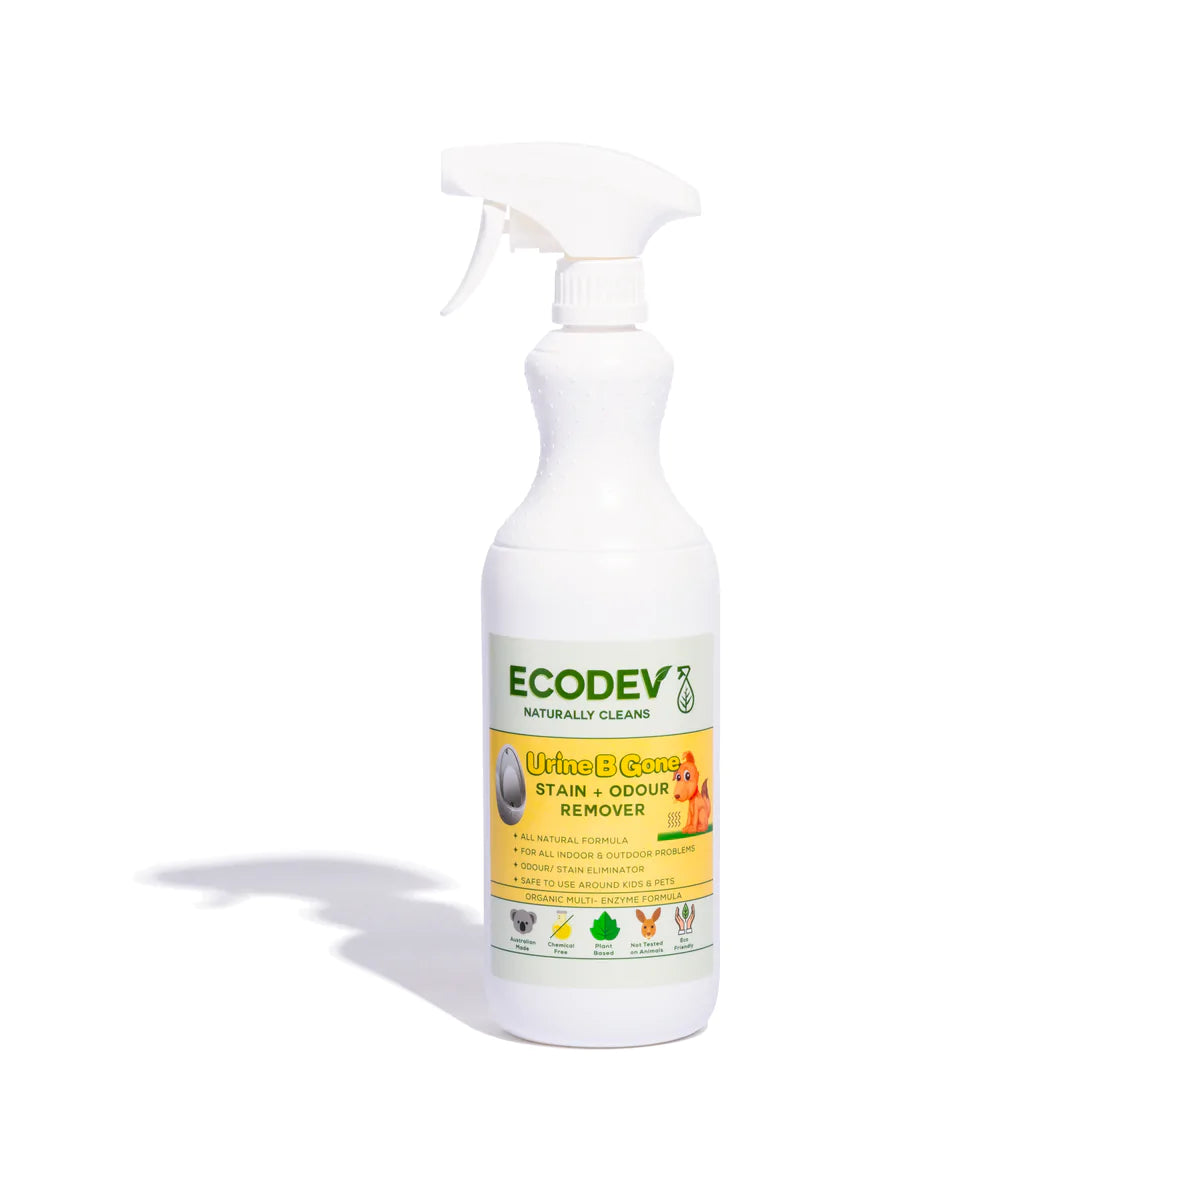 Urine B Gone (Stain & Odour Remover)